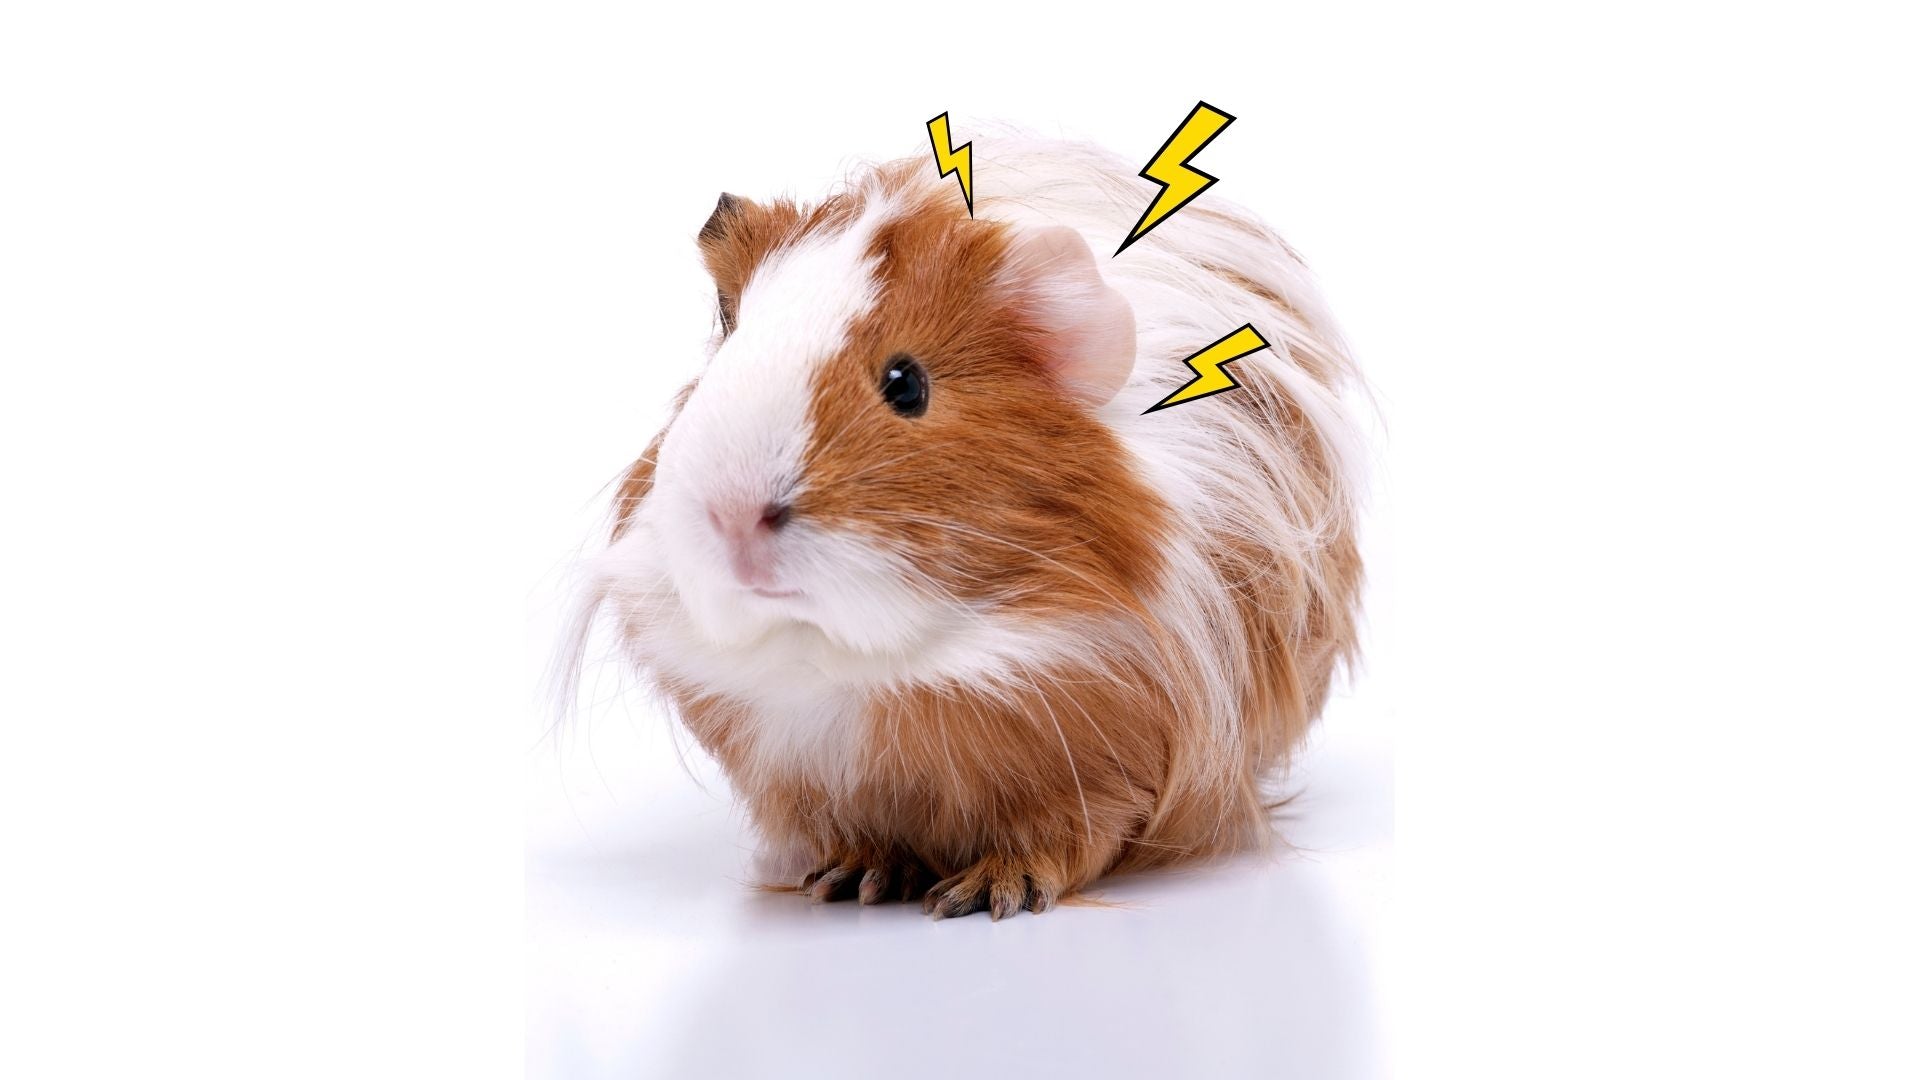 white and ginger long haired guinea pig on white background stress stressed